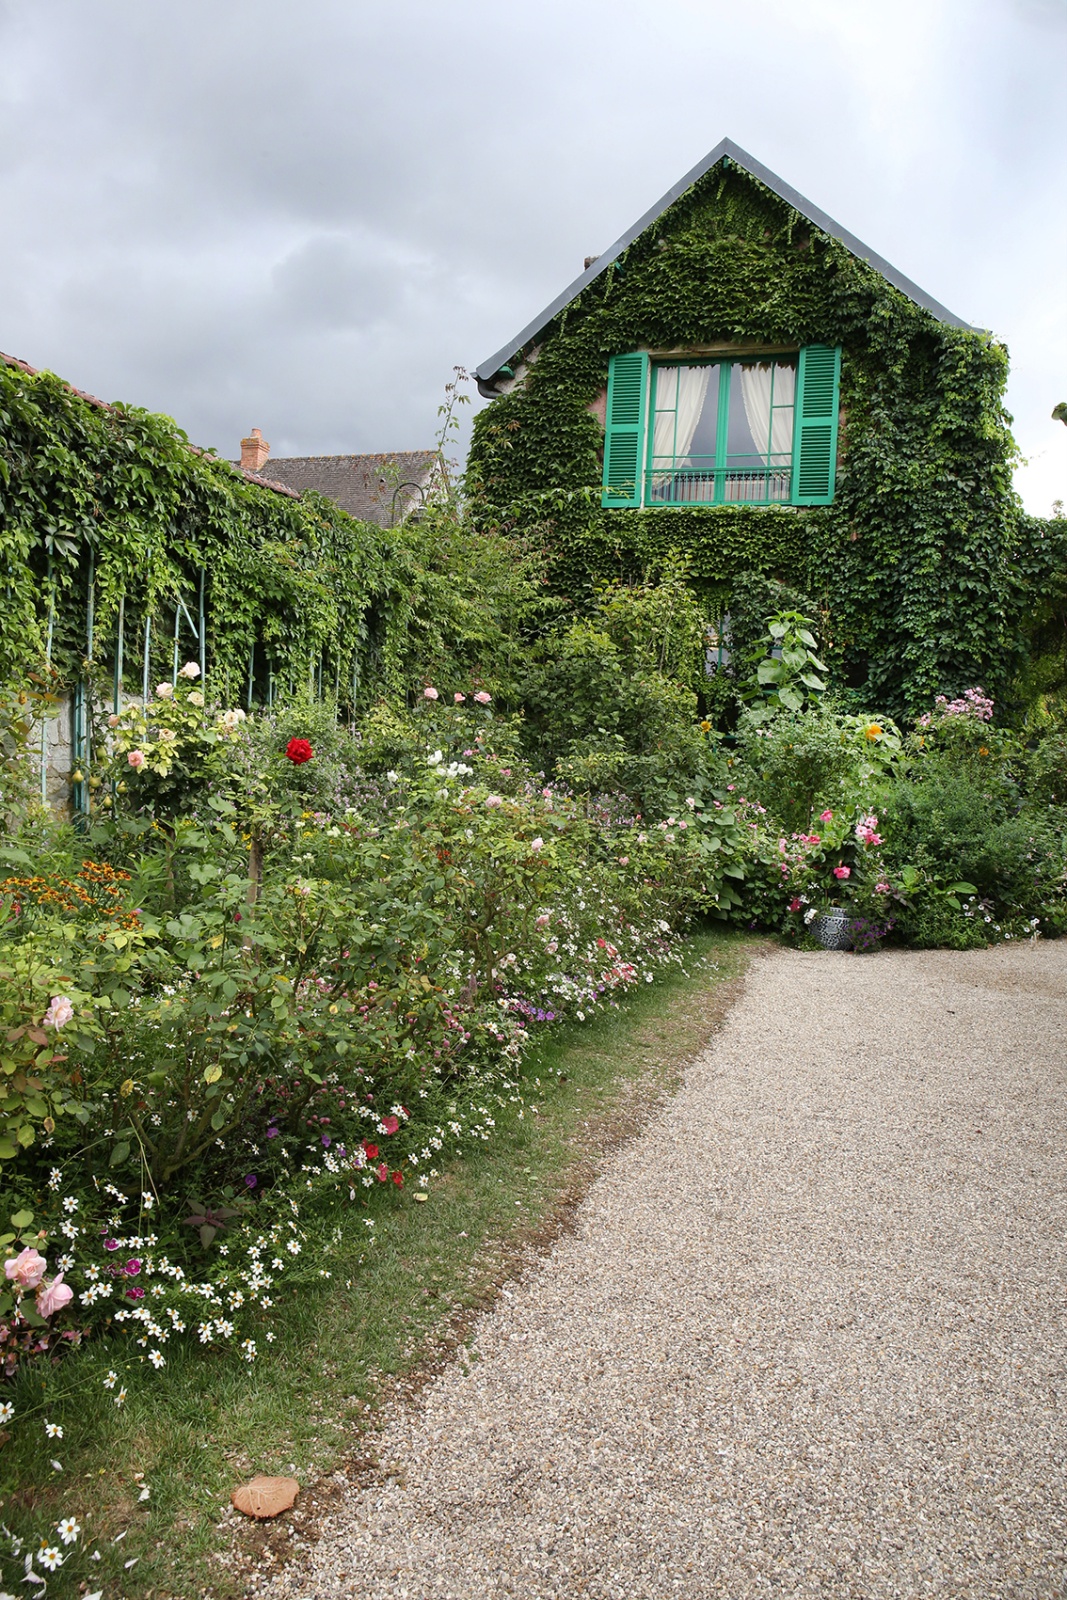 Claude Monet's House Museum, Giverny, France 2018